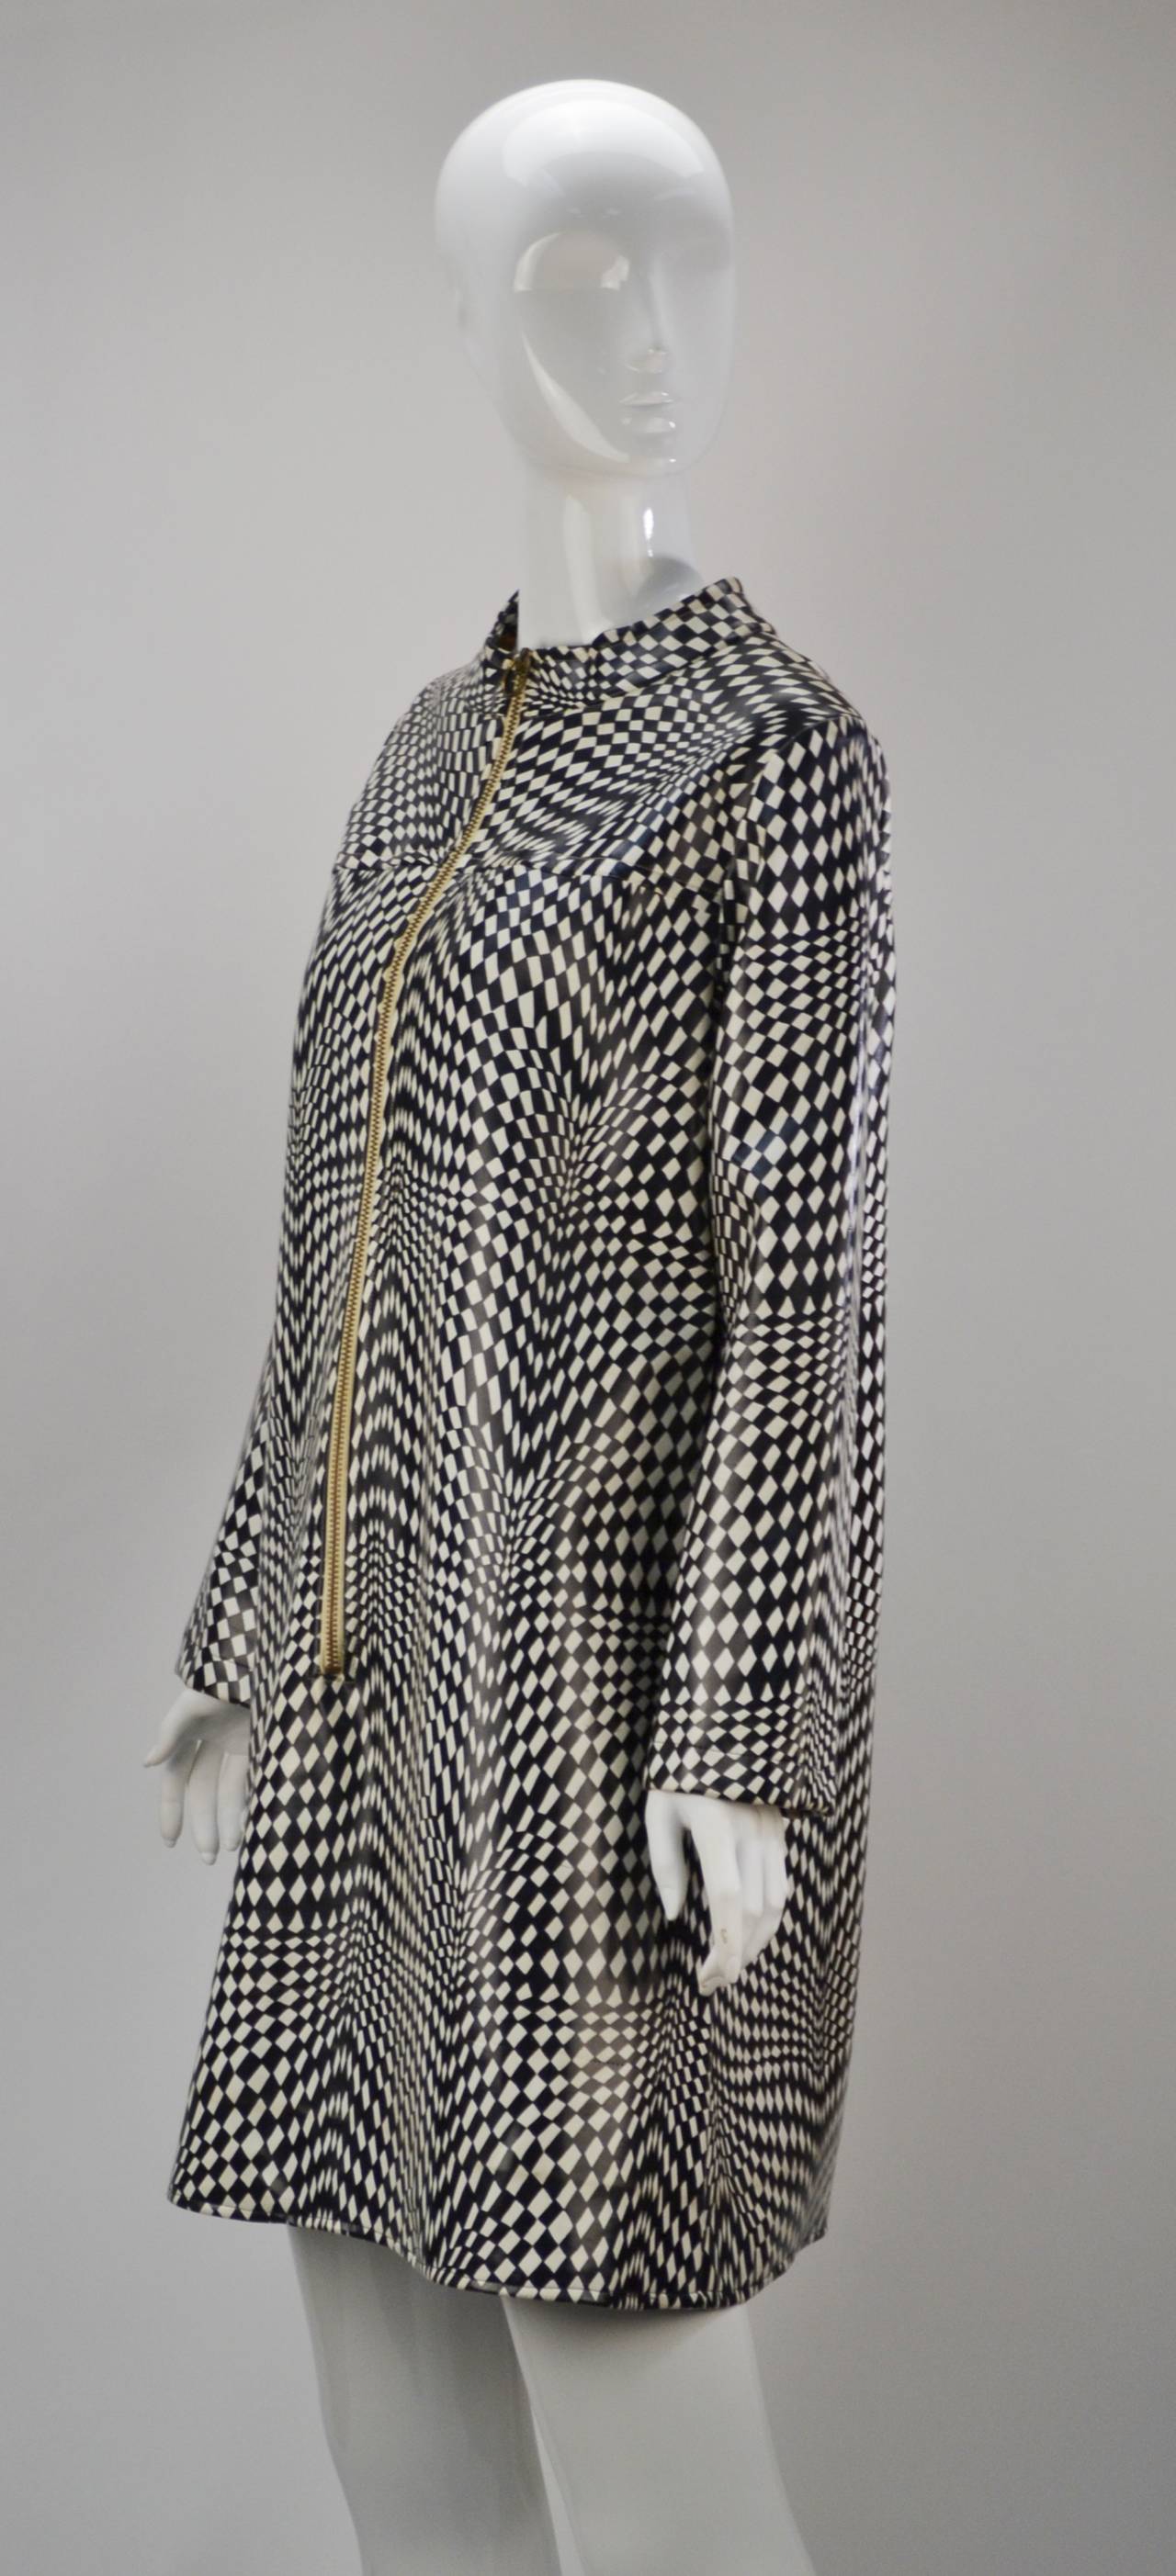 Edgy vinyl equals instant style (and protection from the Rain)! 1960's mod black and white psychedelic checker print with front zipper. Long sleeves and collar band A-Line dress/raincoat.

A MRS. Couture favorite!

Modern size 6/8.

*All